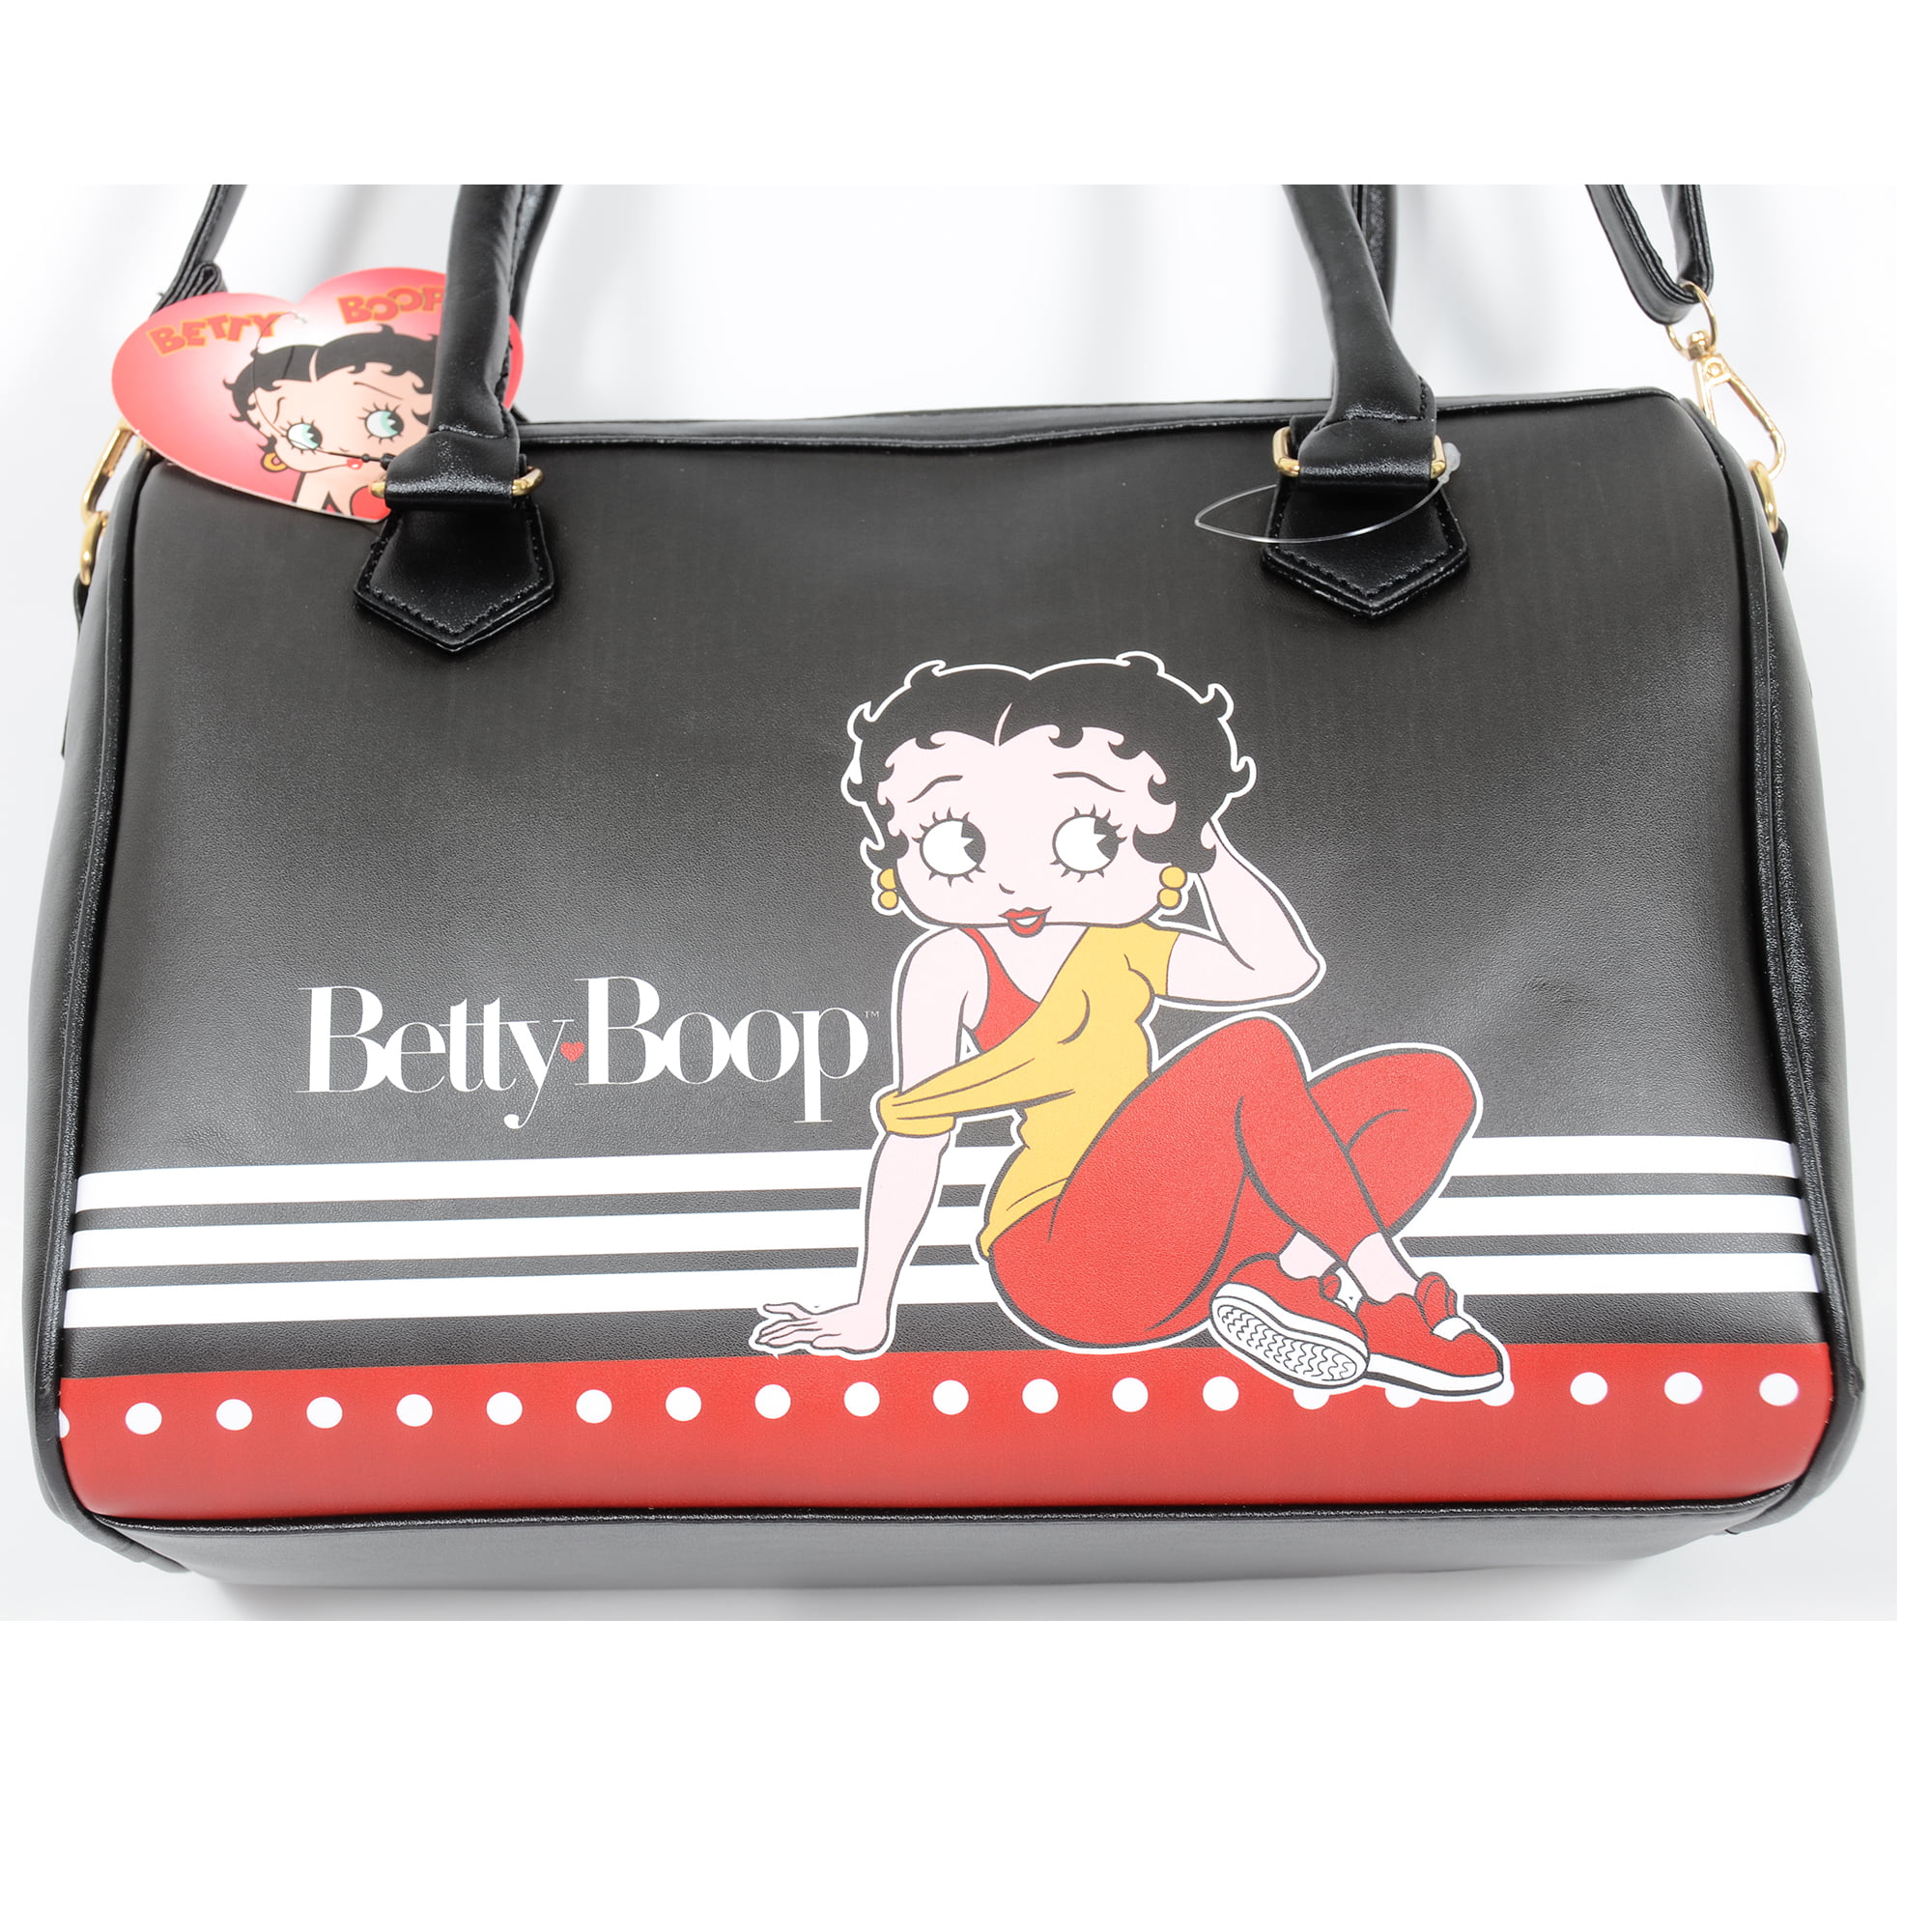 Be-Tty Bo-Op Leather Cell Phone Purse Crossbody Bags Small Shoulder Bag Travel Wallet Handbag With Adjustable Strap